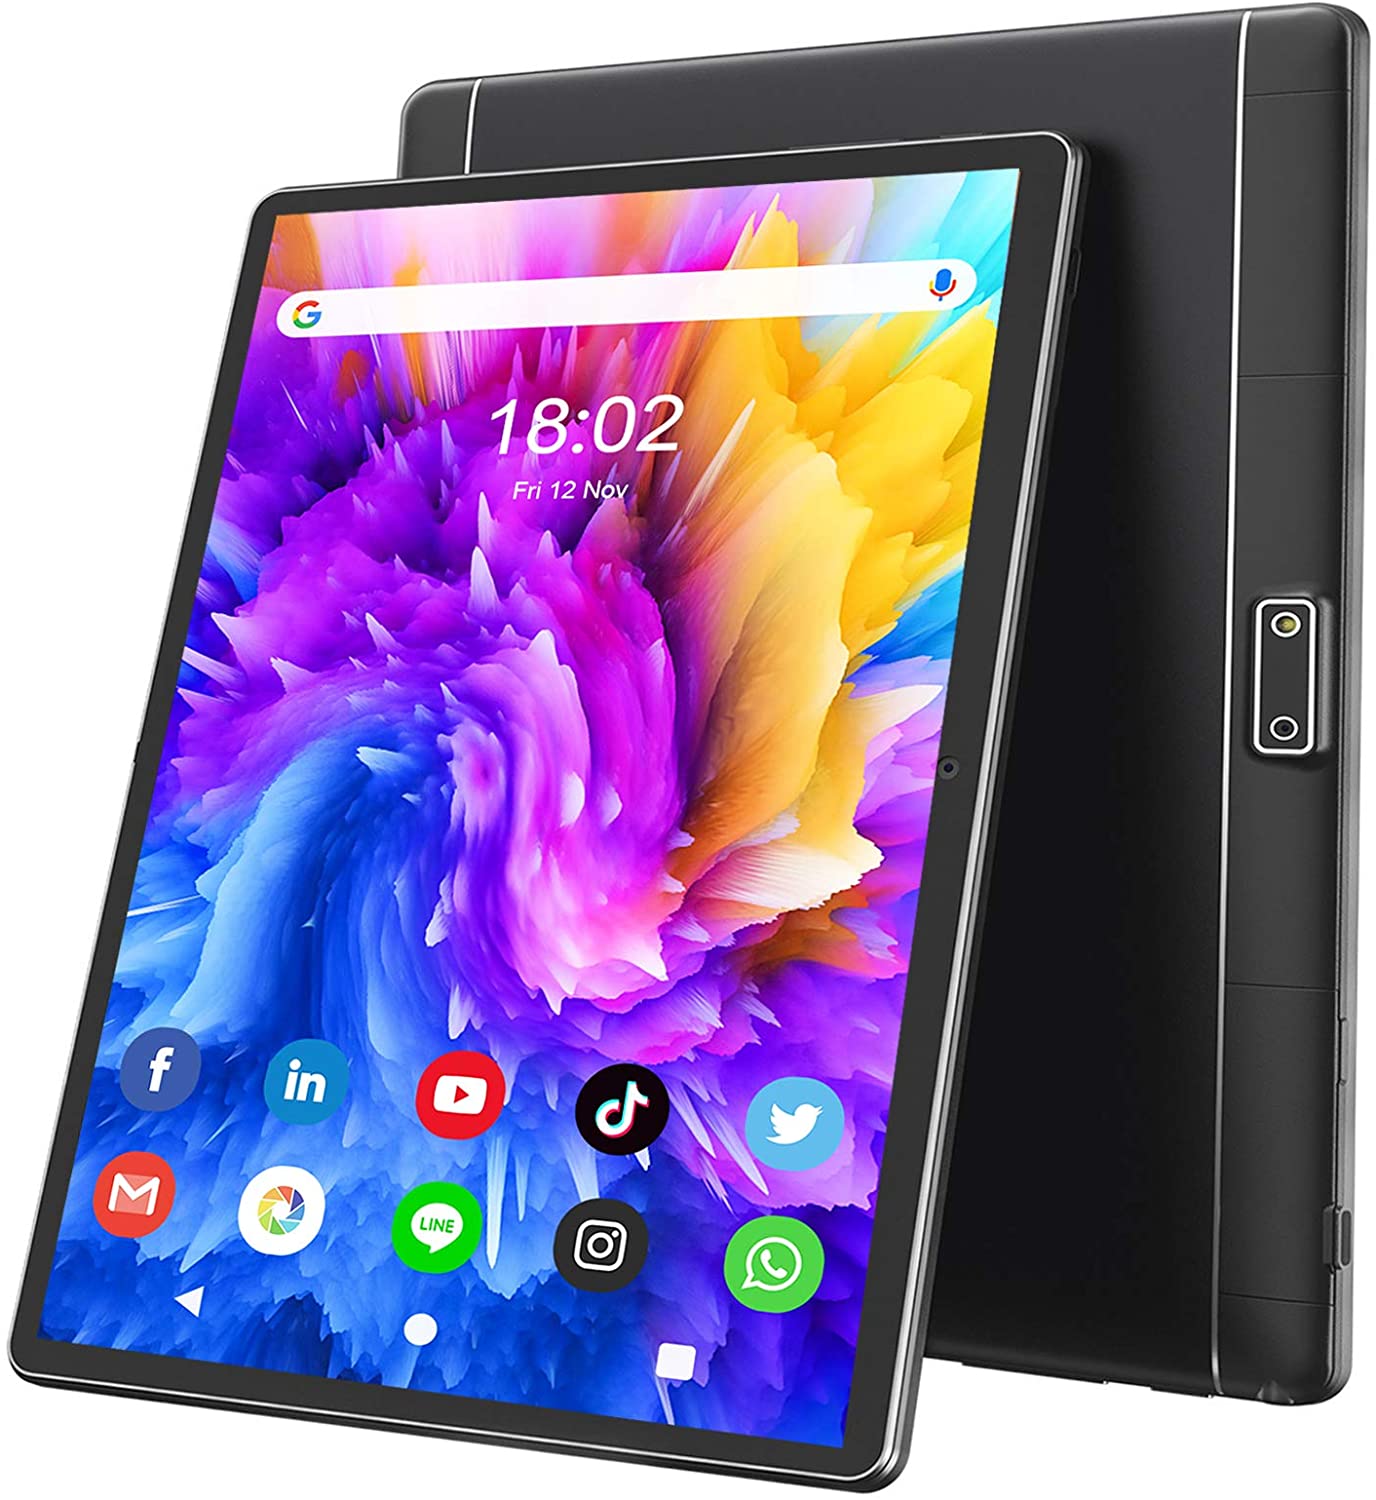 Tablet 10 Inch Android 9 HD Dual Sim Tablets with Quad Core, 32GB ROM /128 GB Expand, 3G Phone Call, WiFi, Bluetooth, Dual Camera, GPS, IPS Touchscreen, GMS Google Certified Tablet PC, (Black) - image 1 of 7